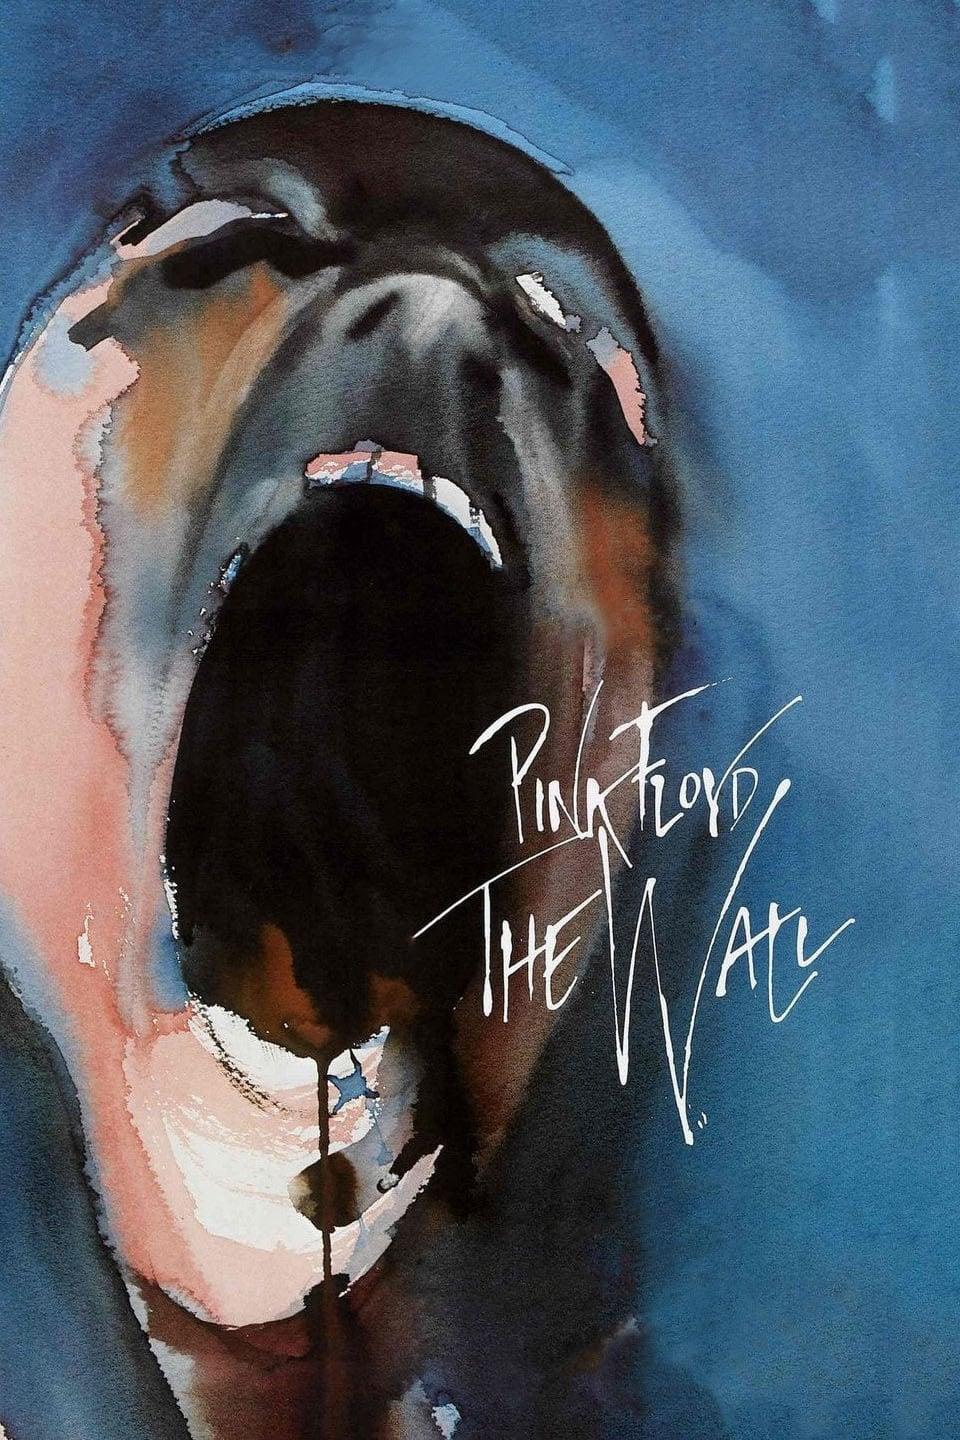 Pink Floyd: The Wall poster